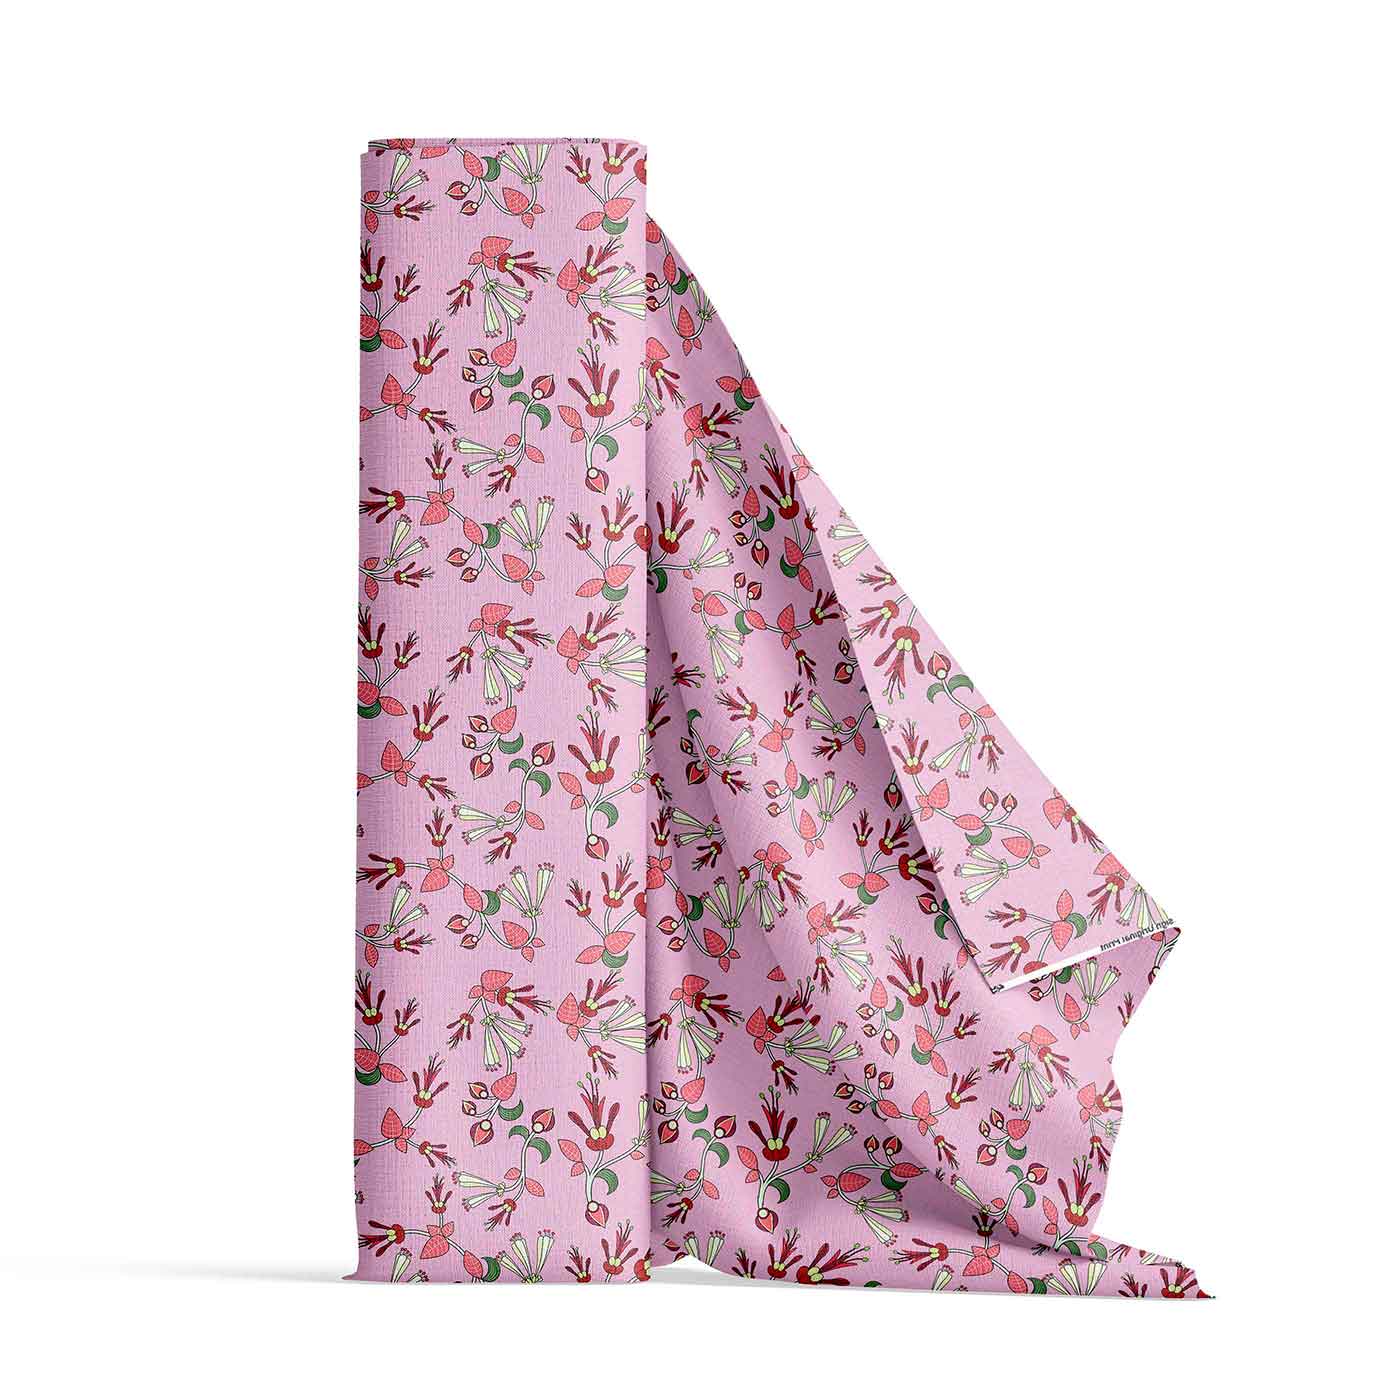 Strawberry Floral Satin Fabric By the Yard Pre Order